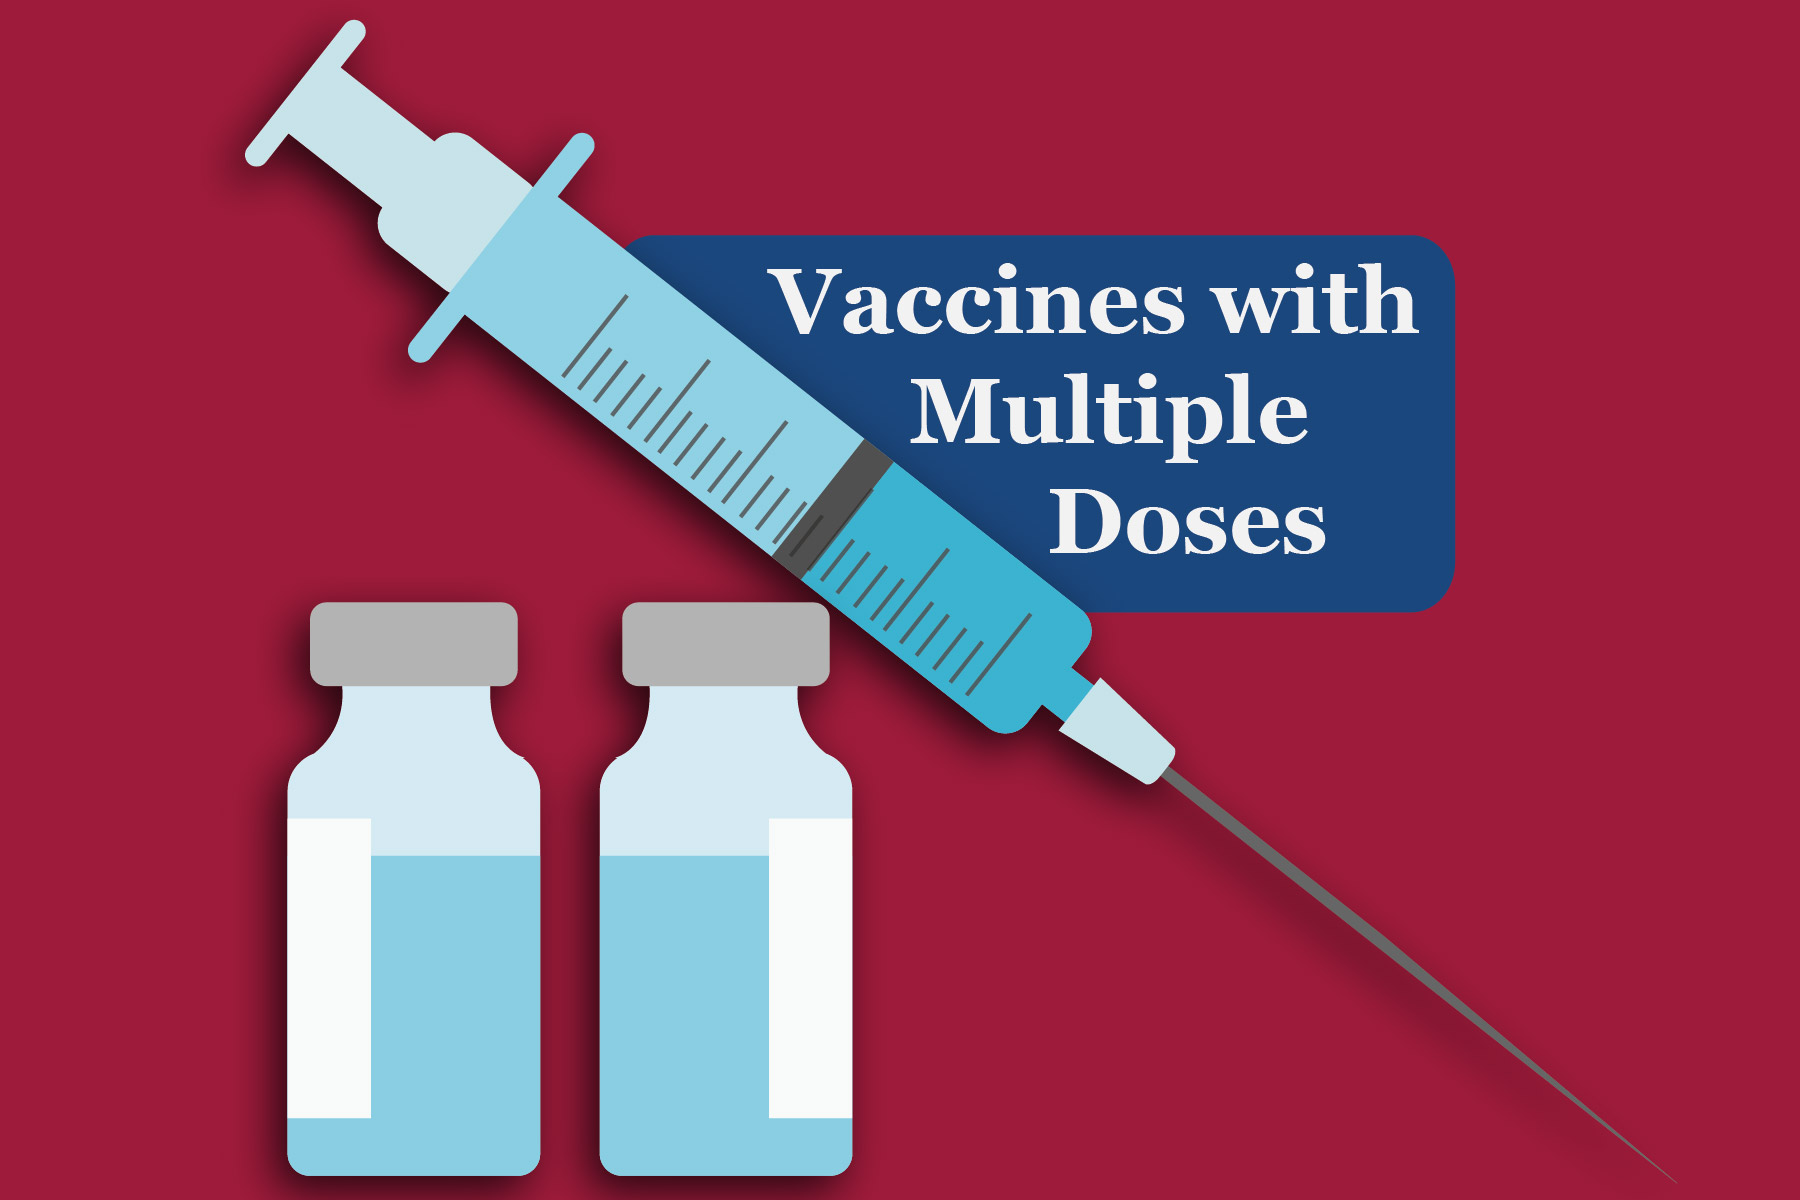 Vaccines with Multiple Doses